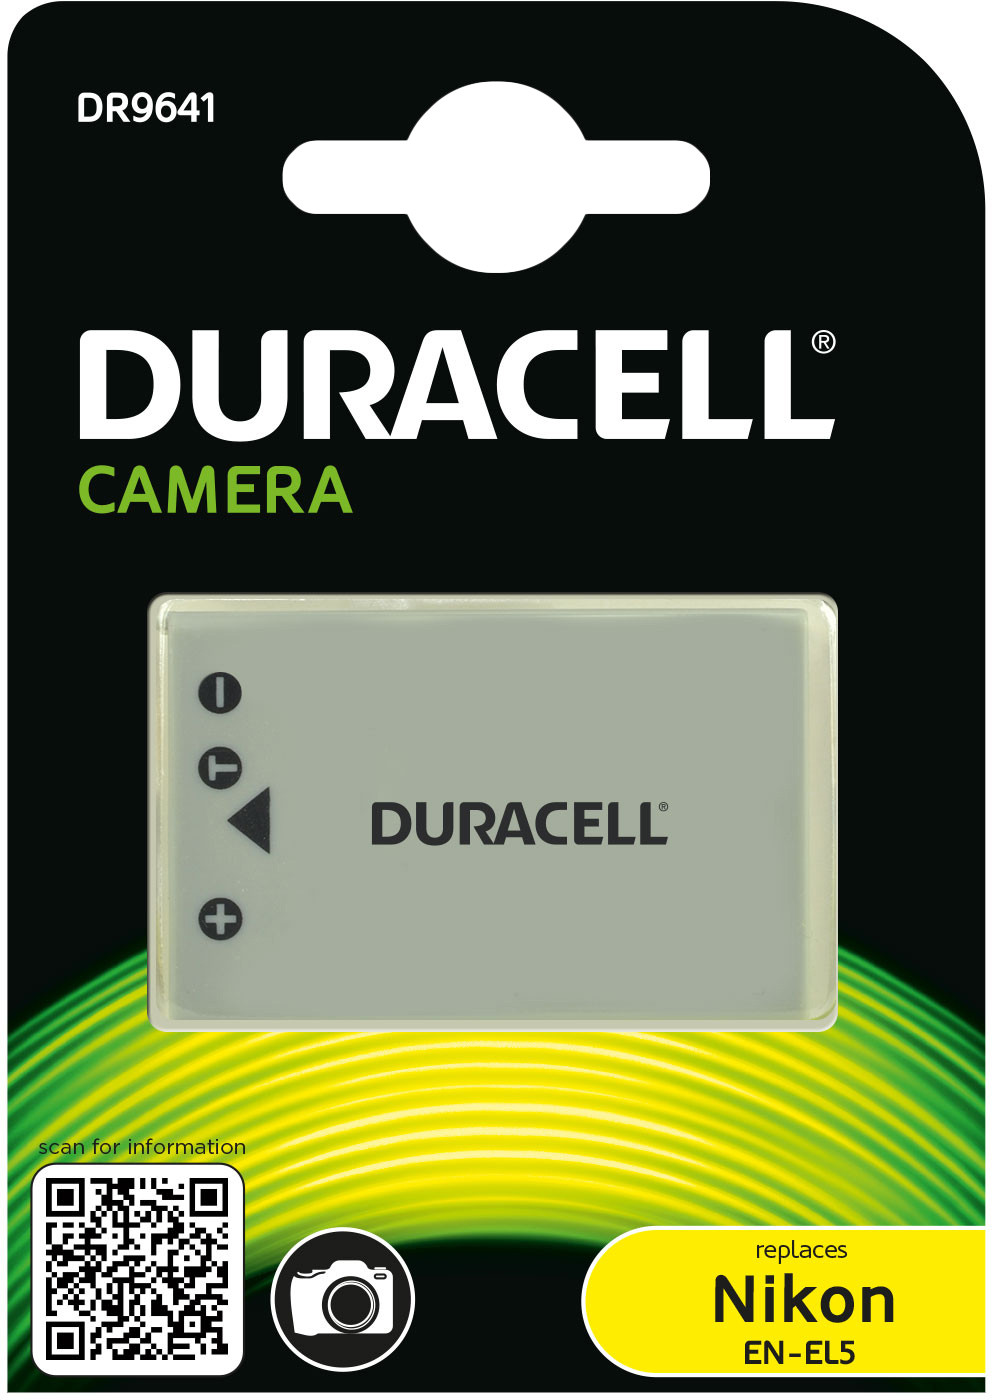 DURACELL DR9641